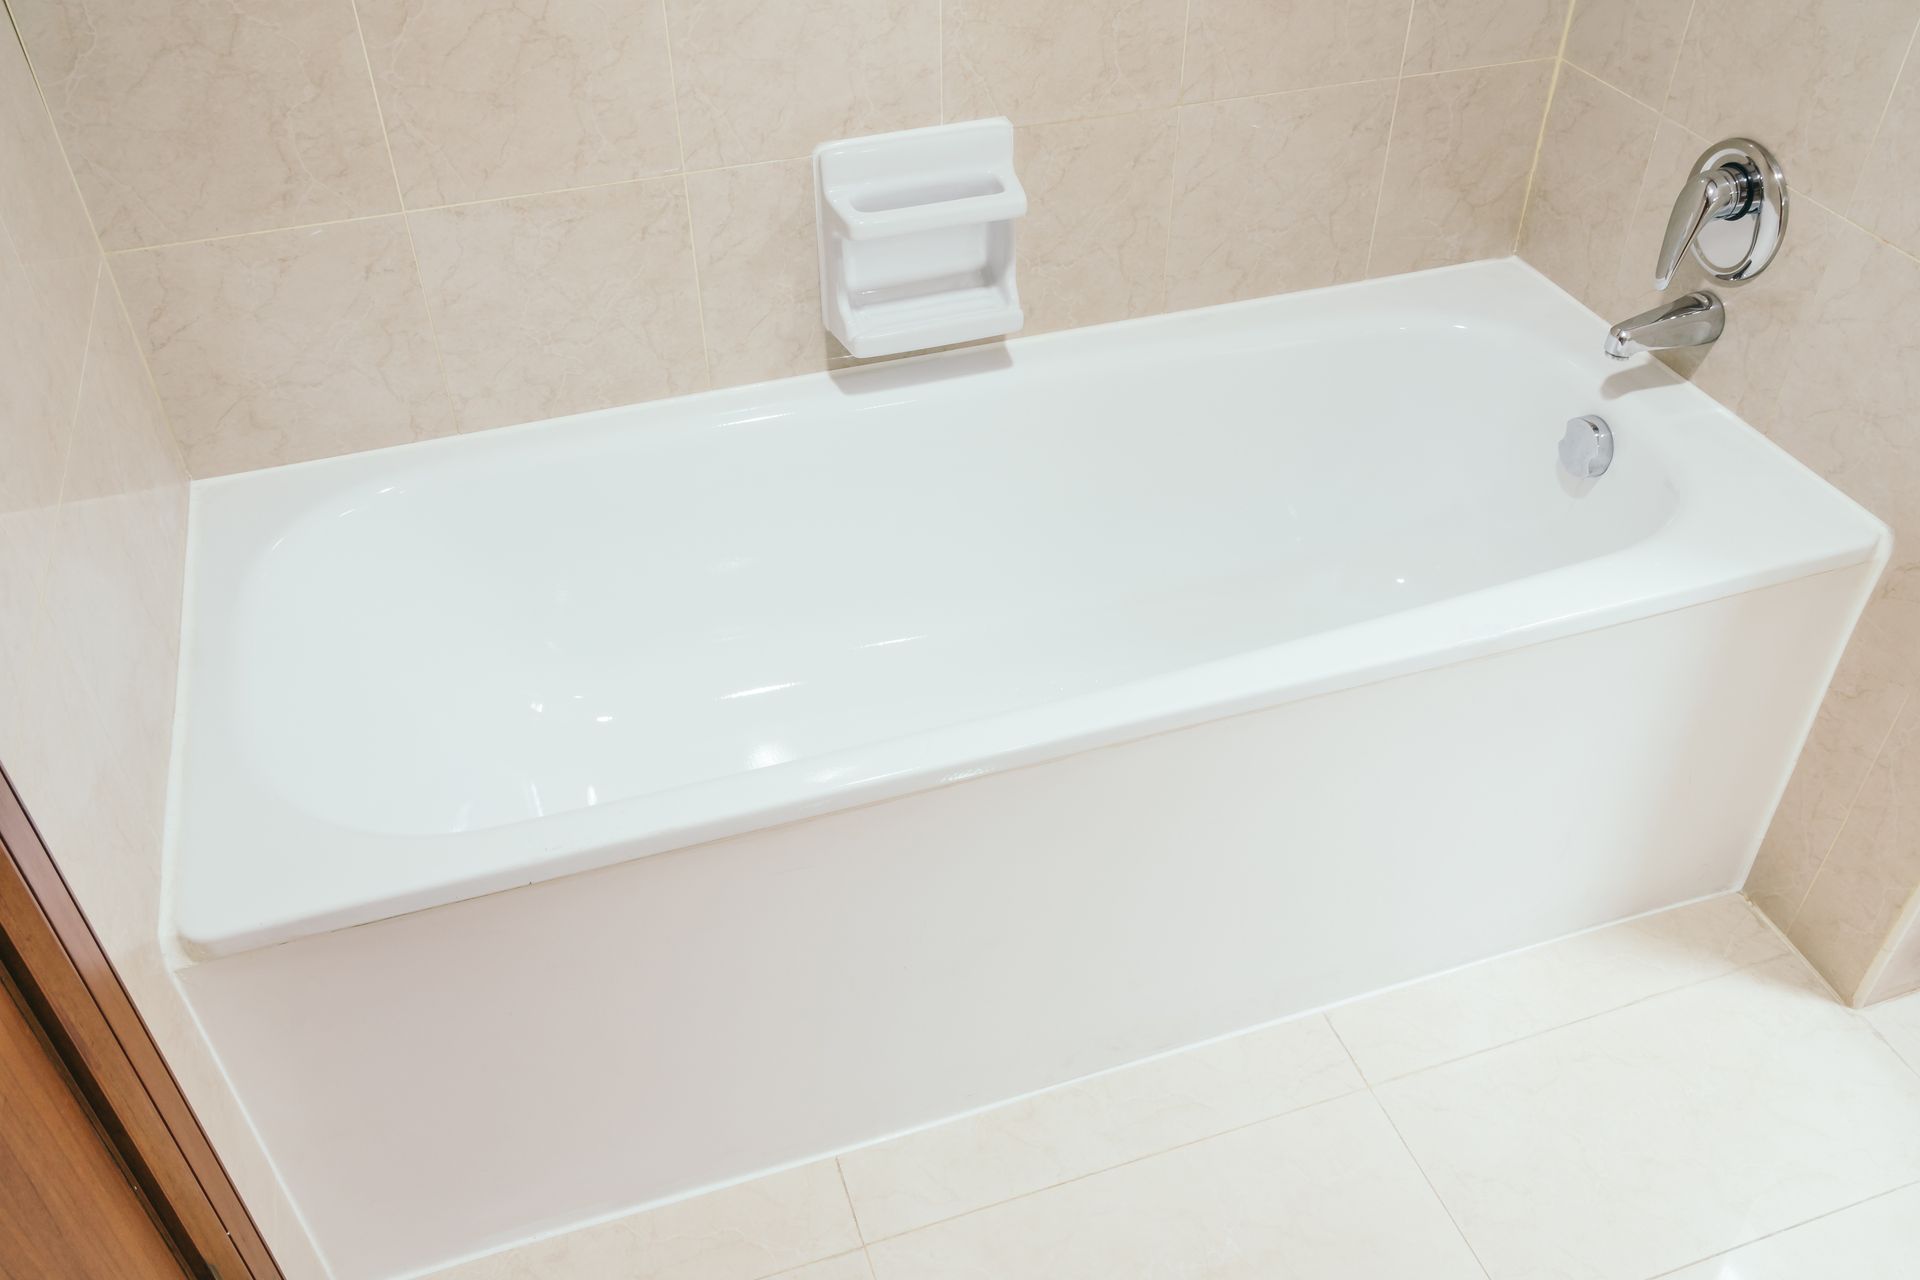 understanding the causes of a cracked bathtub